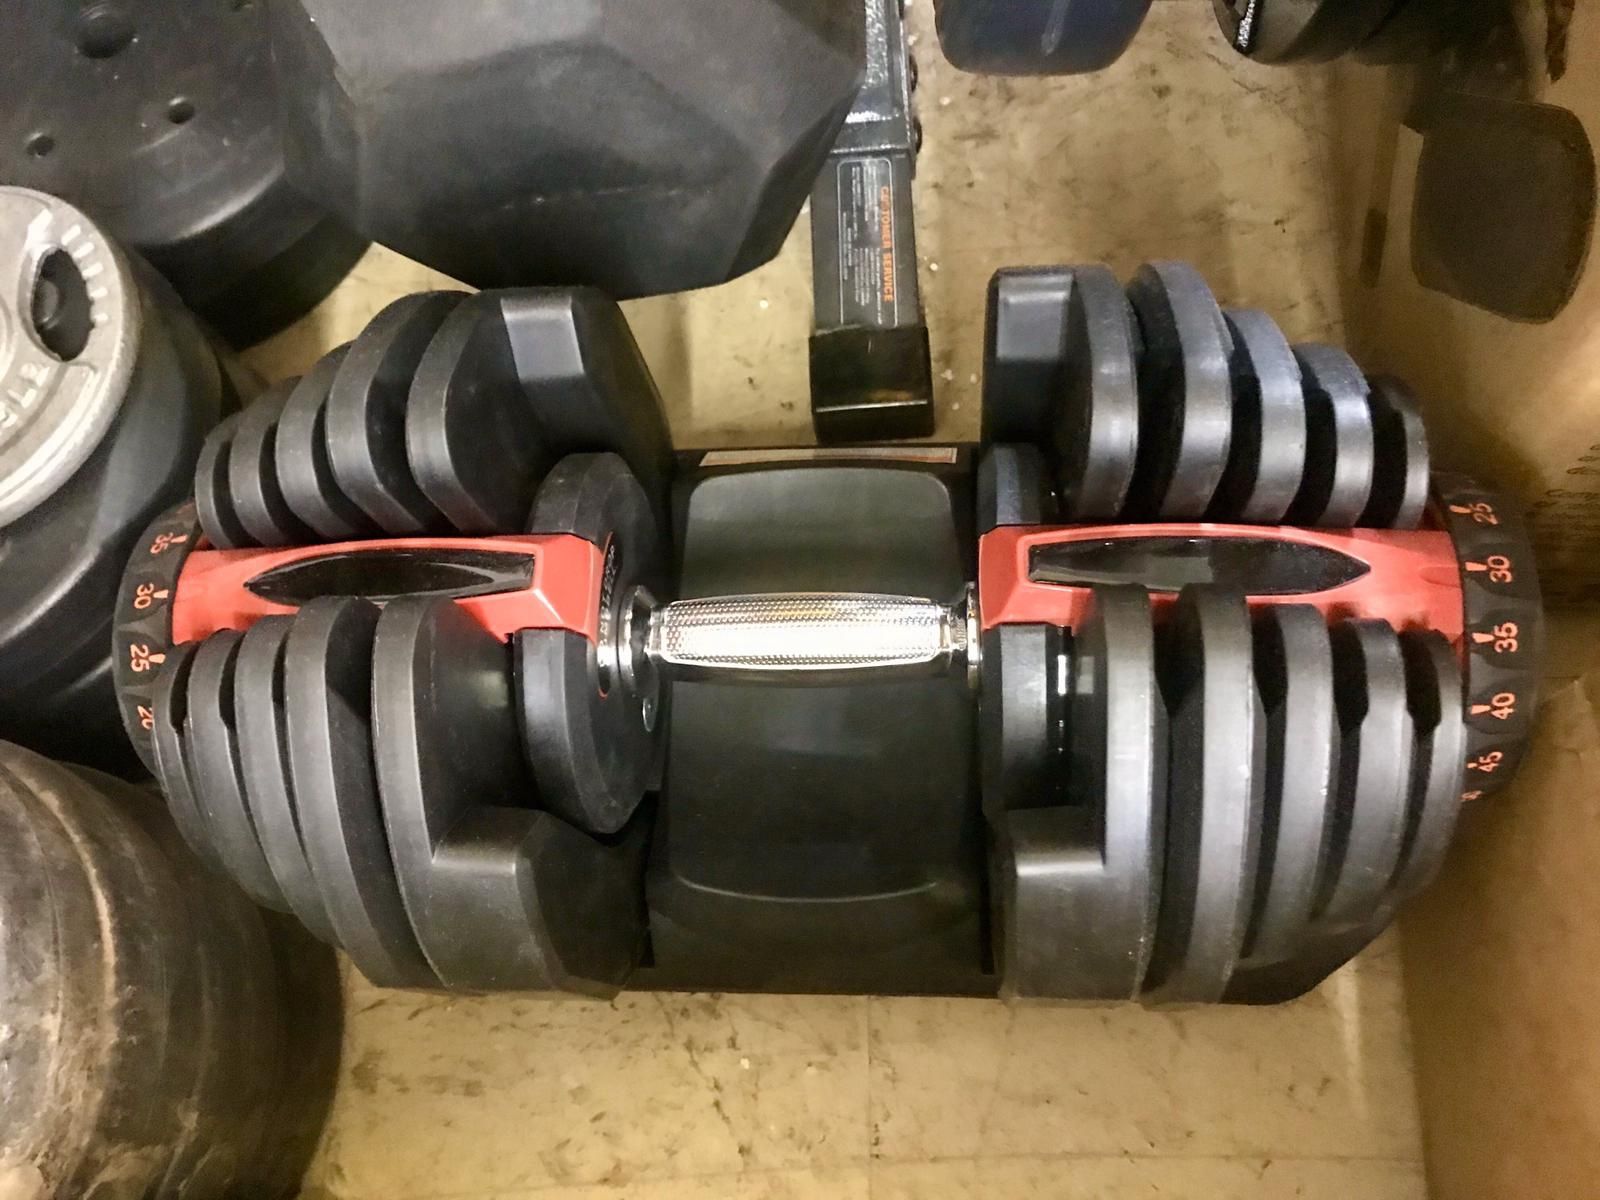 One Brand New Adjustable Dumbbell. 10 to 90 lbs.